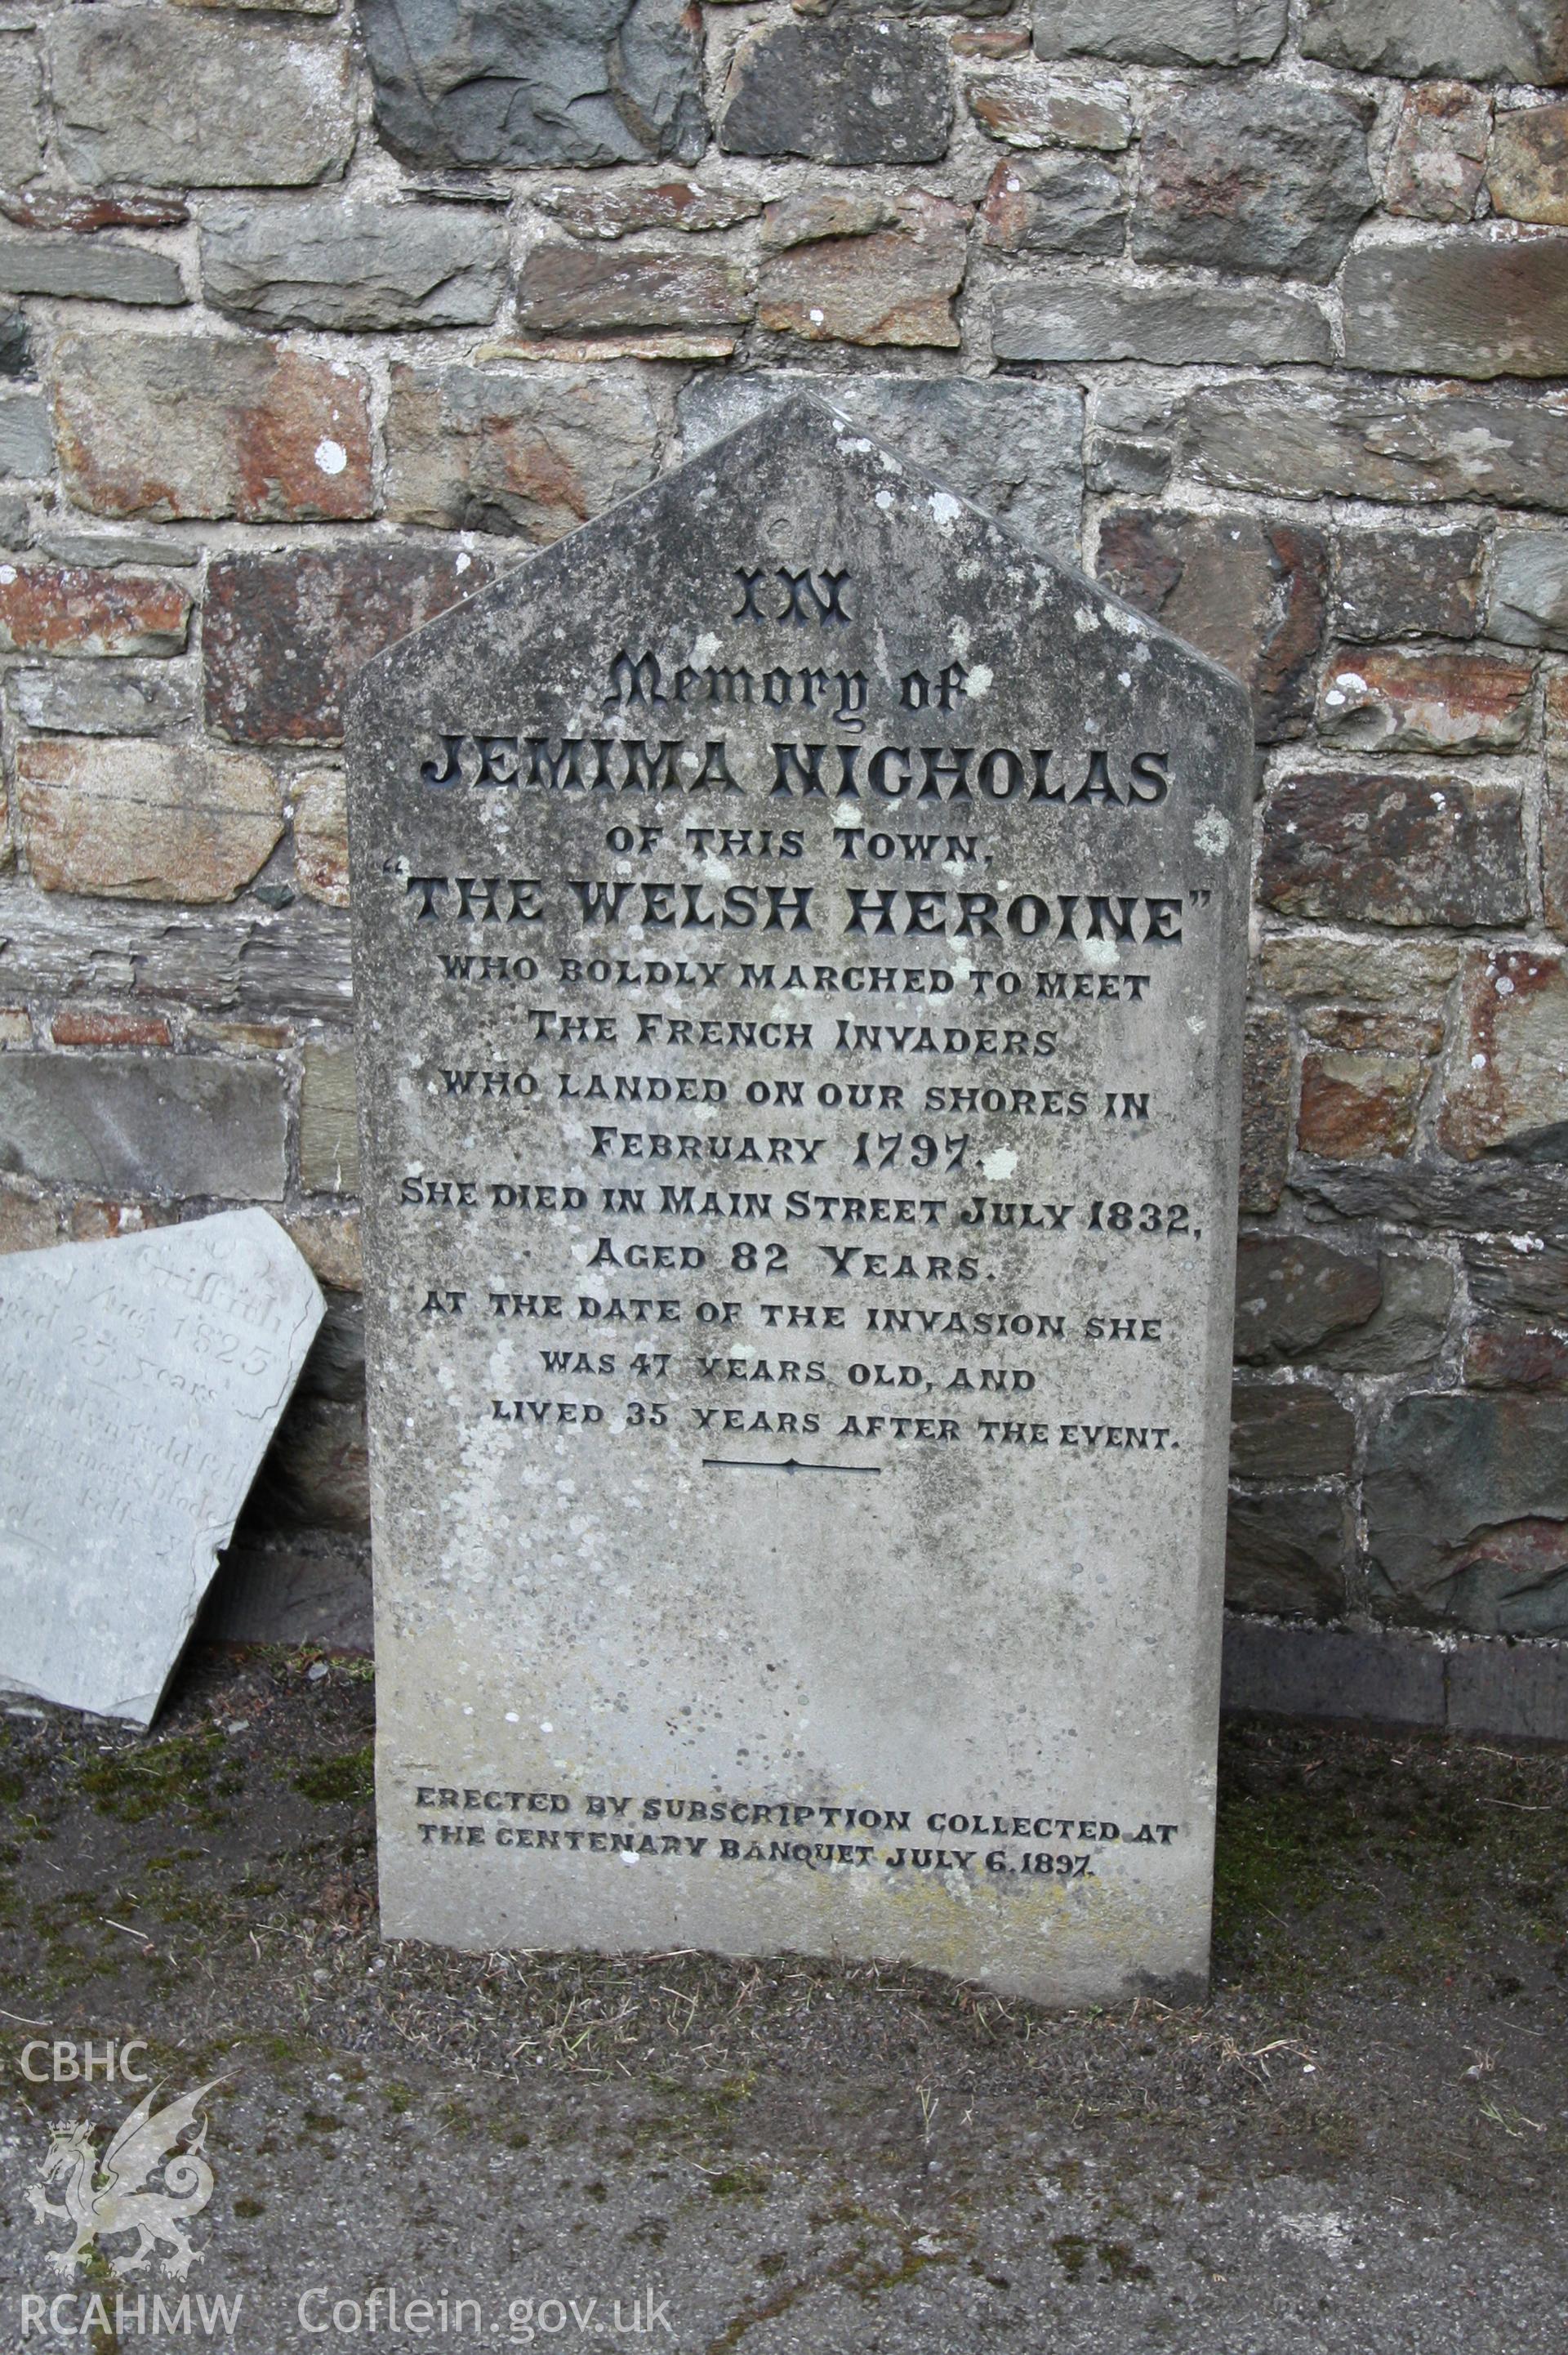 St Mary's Church, detail of memorial stone to Jemima Nicholas, 'The Welsh Heroine'.